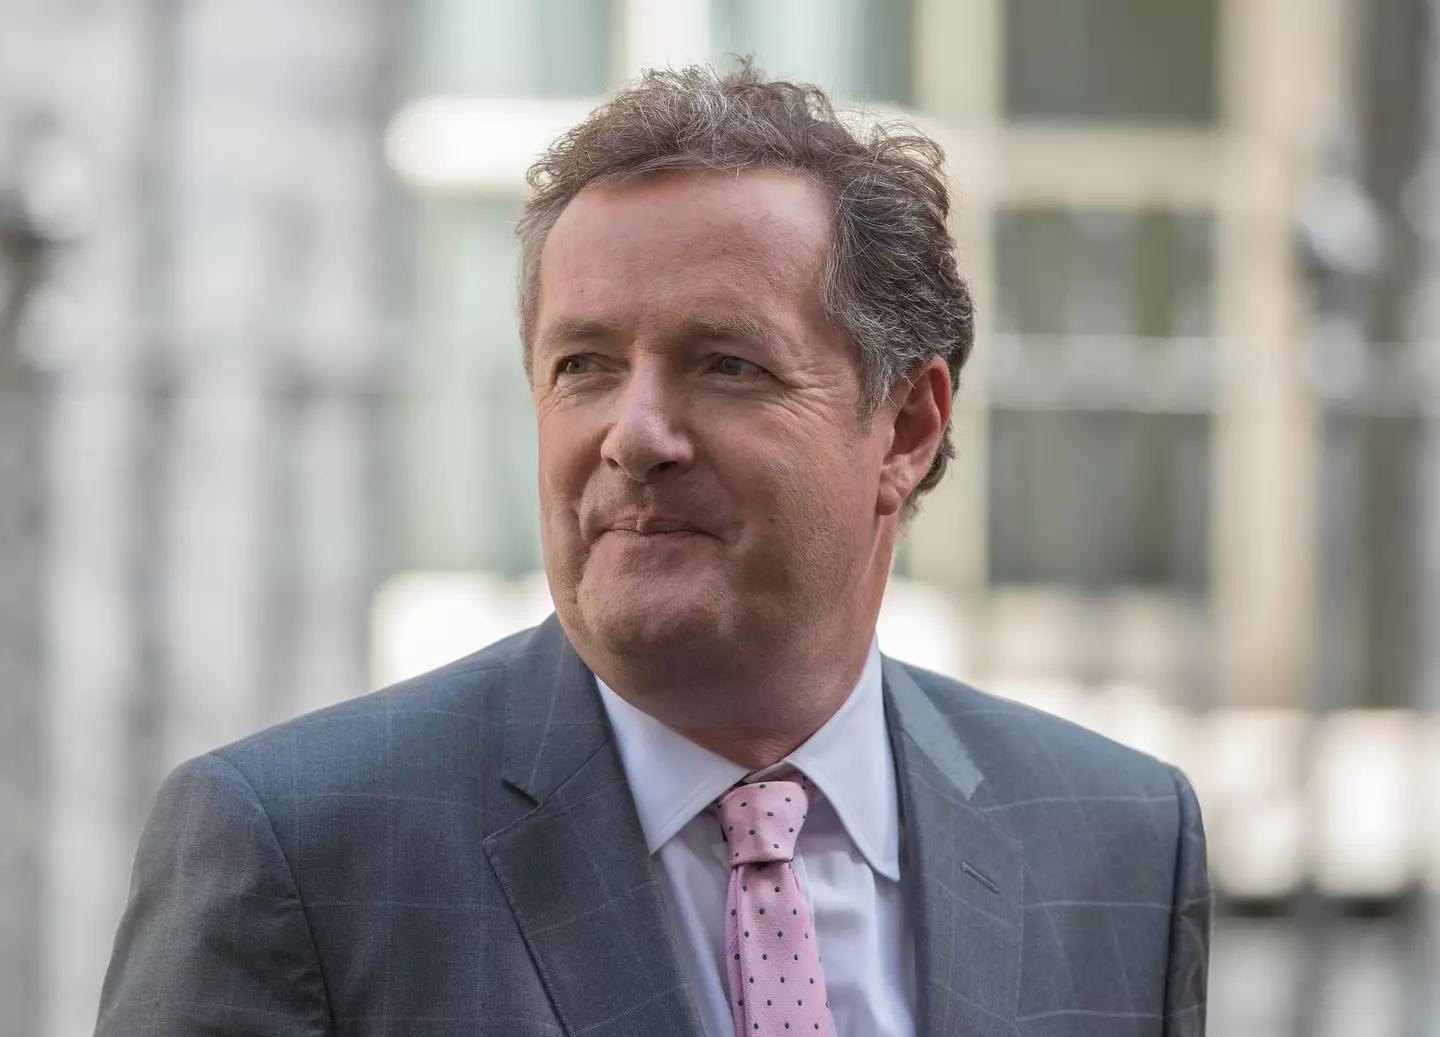 Piers Morgan has claimed the former glamour model said she wanted to have sex with him.